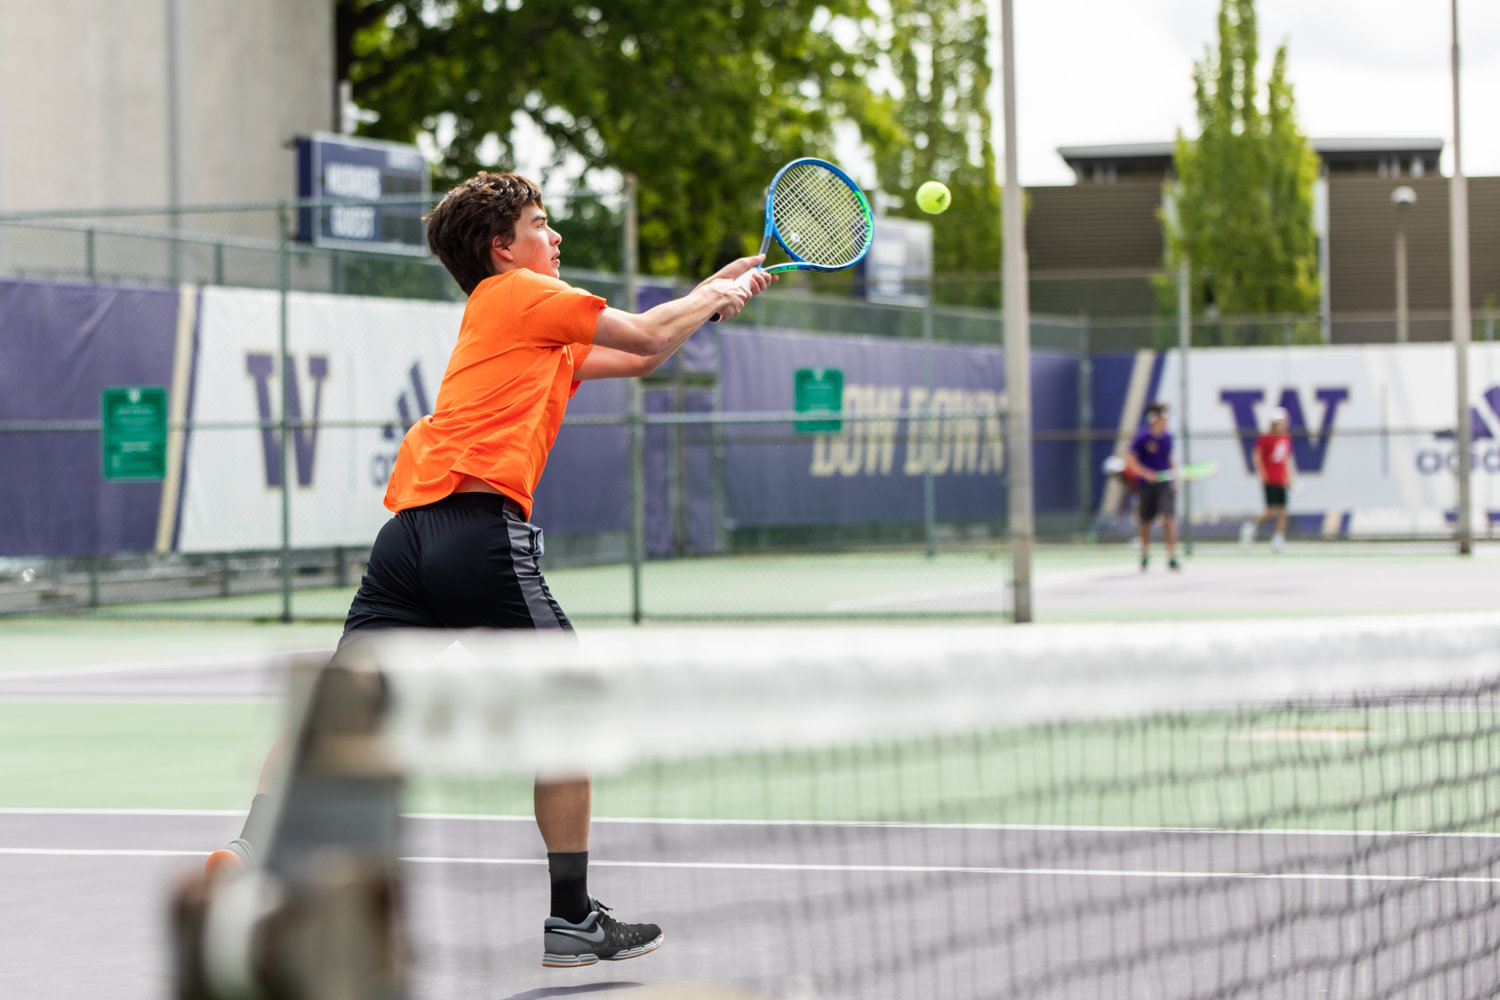 Centralia's Brandon Yeung leans to hit the ball during the first set of the 2A boys' doubles tennis state competition on May 27, 2022.